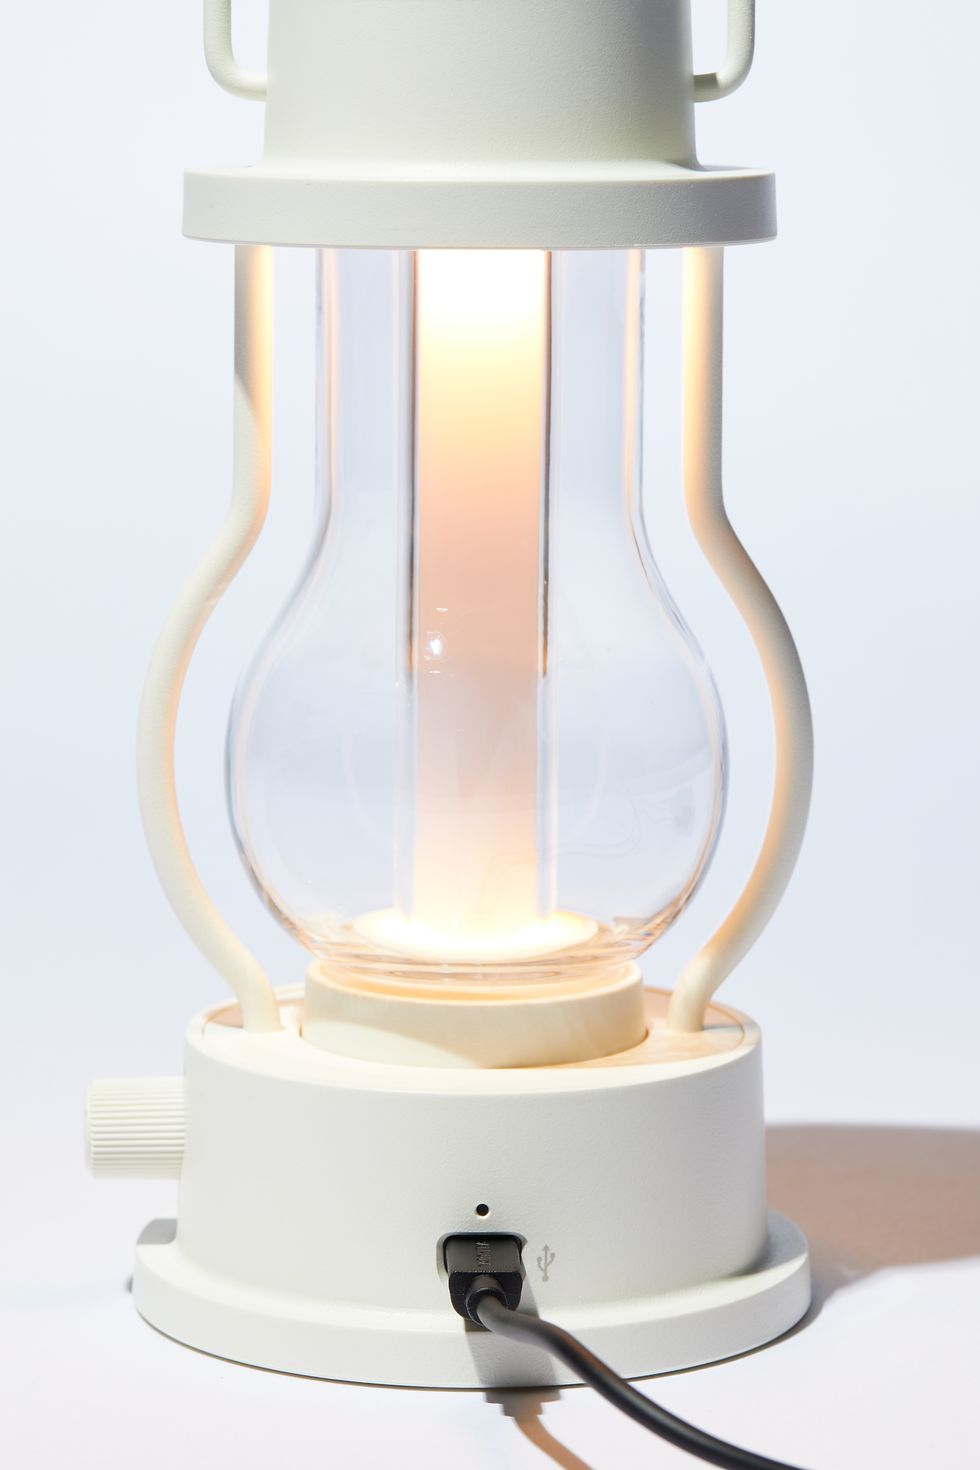 BALMUDA The LED Lantern features 3 light modes and up to 50 hours of  cord-free use » Gadget Flow